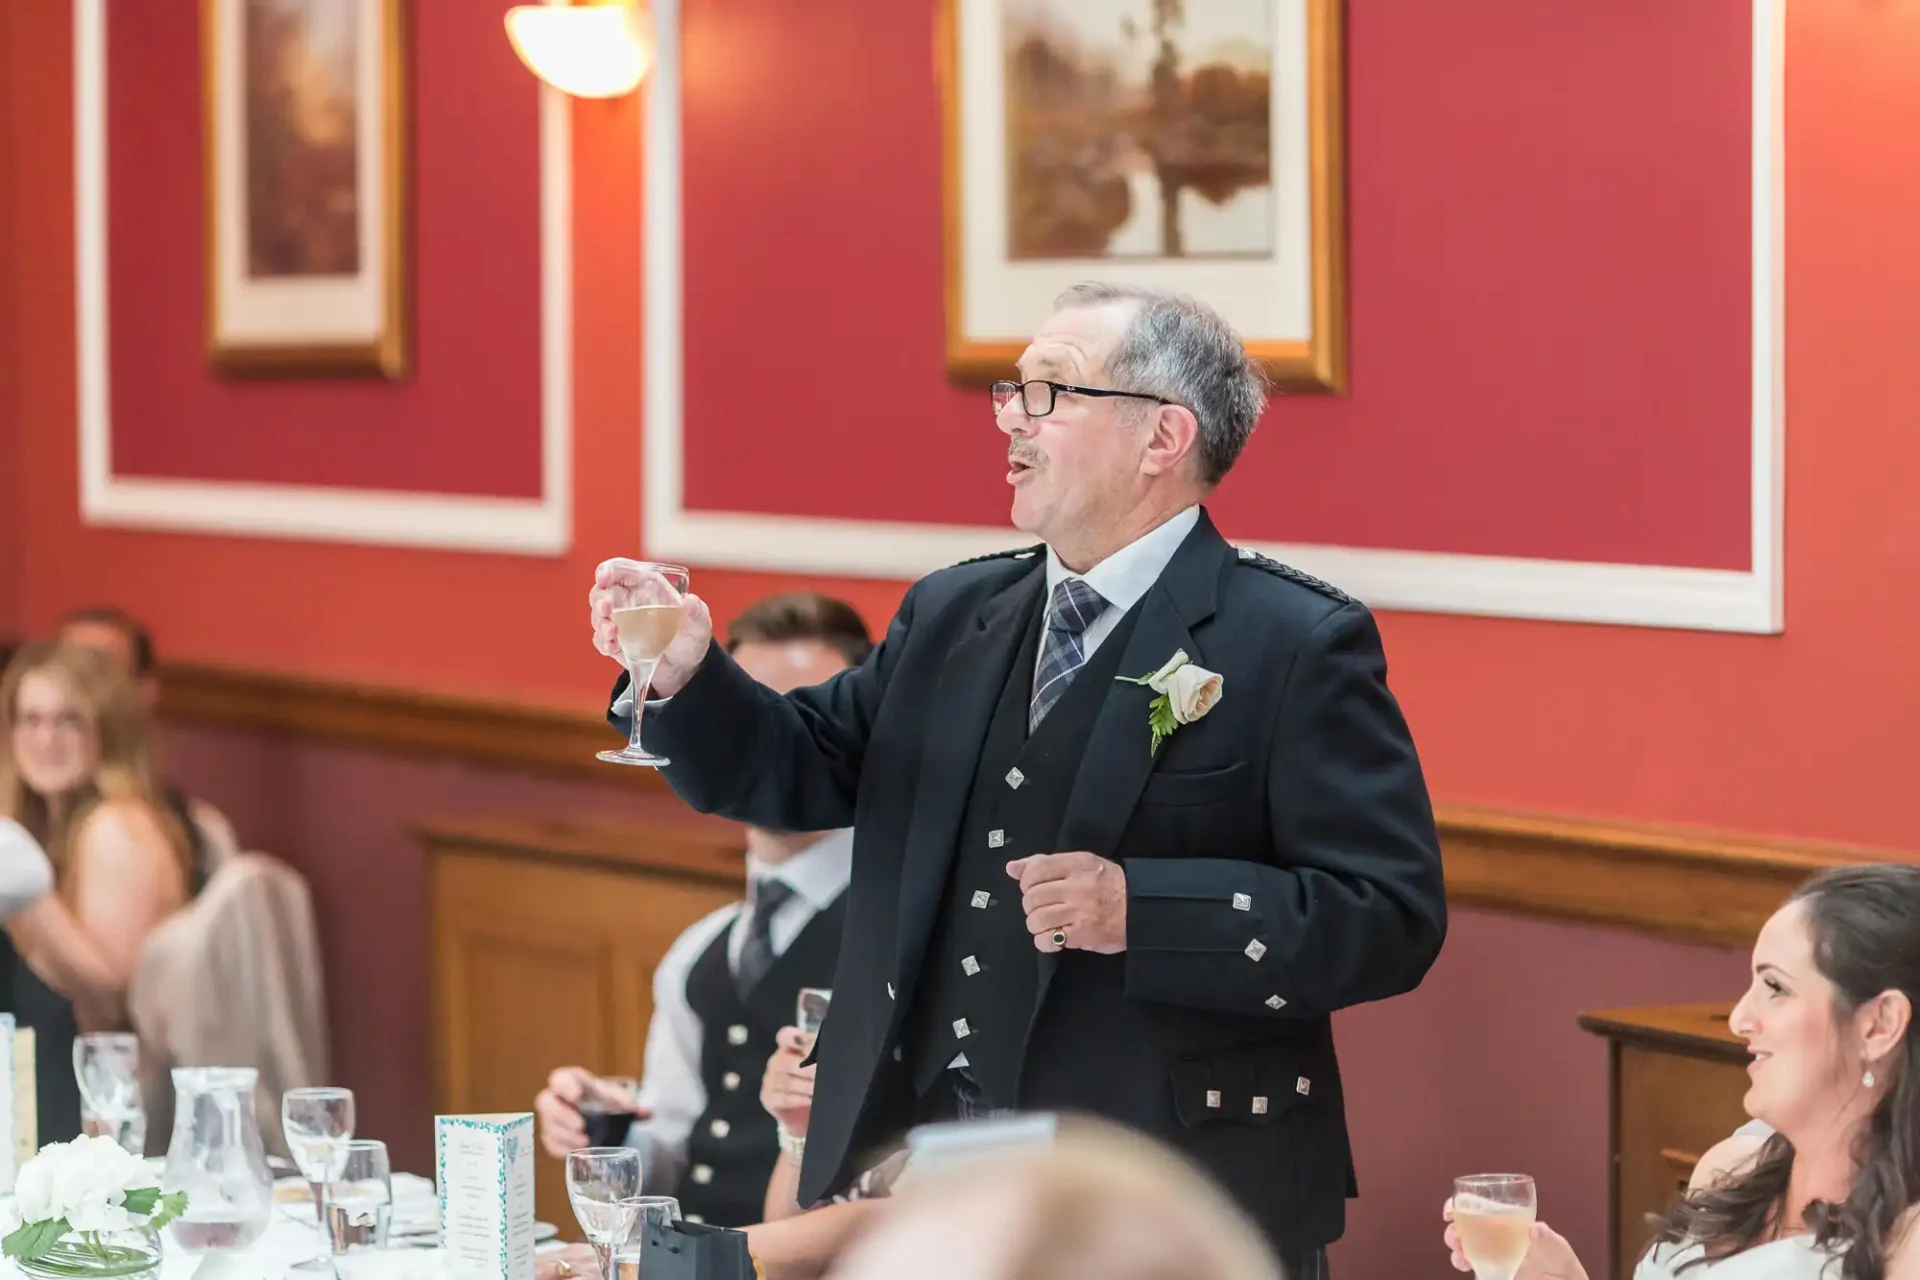 An older man wearing glasses and a formal suit, giving a toast with a wine glass at a wedding reception.